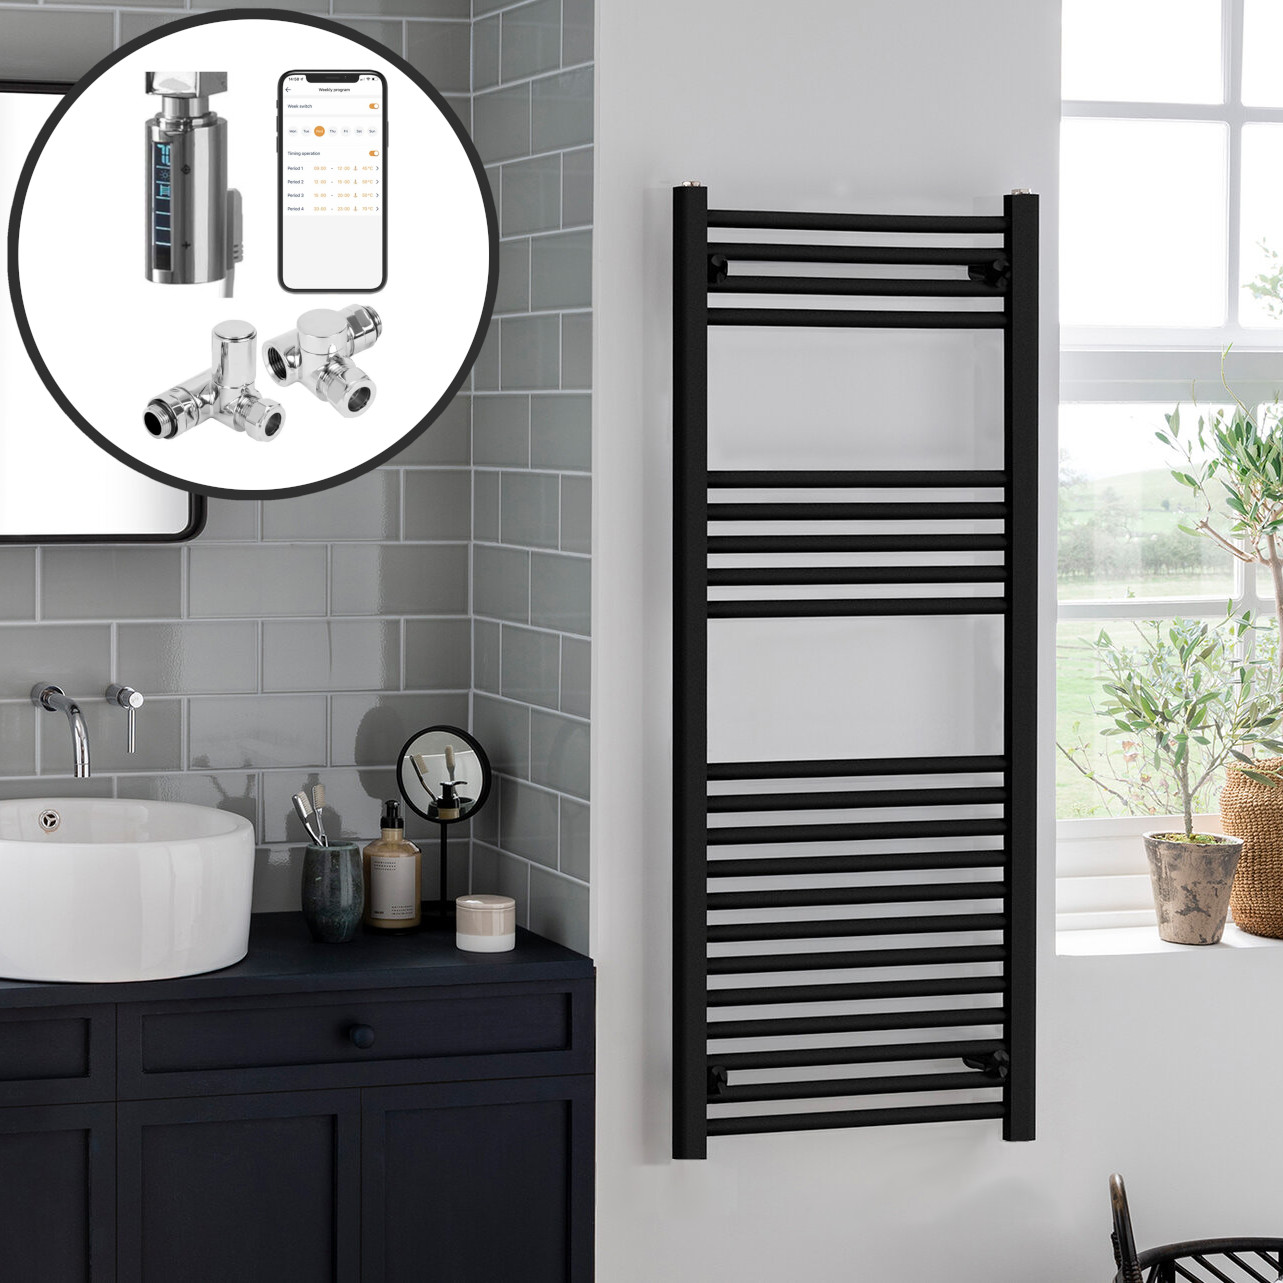 Bray Black | Dual Fuel Towel Rail with Thermostat, Timer + WiFi Control Best Quality & Price, Energy Saving / Economic To Run Buy Online From Adax SolAire UK Shop 2